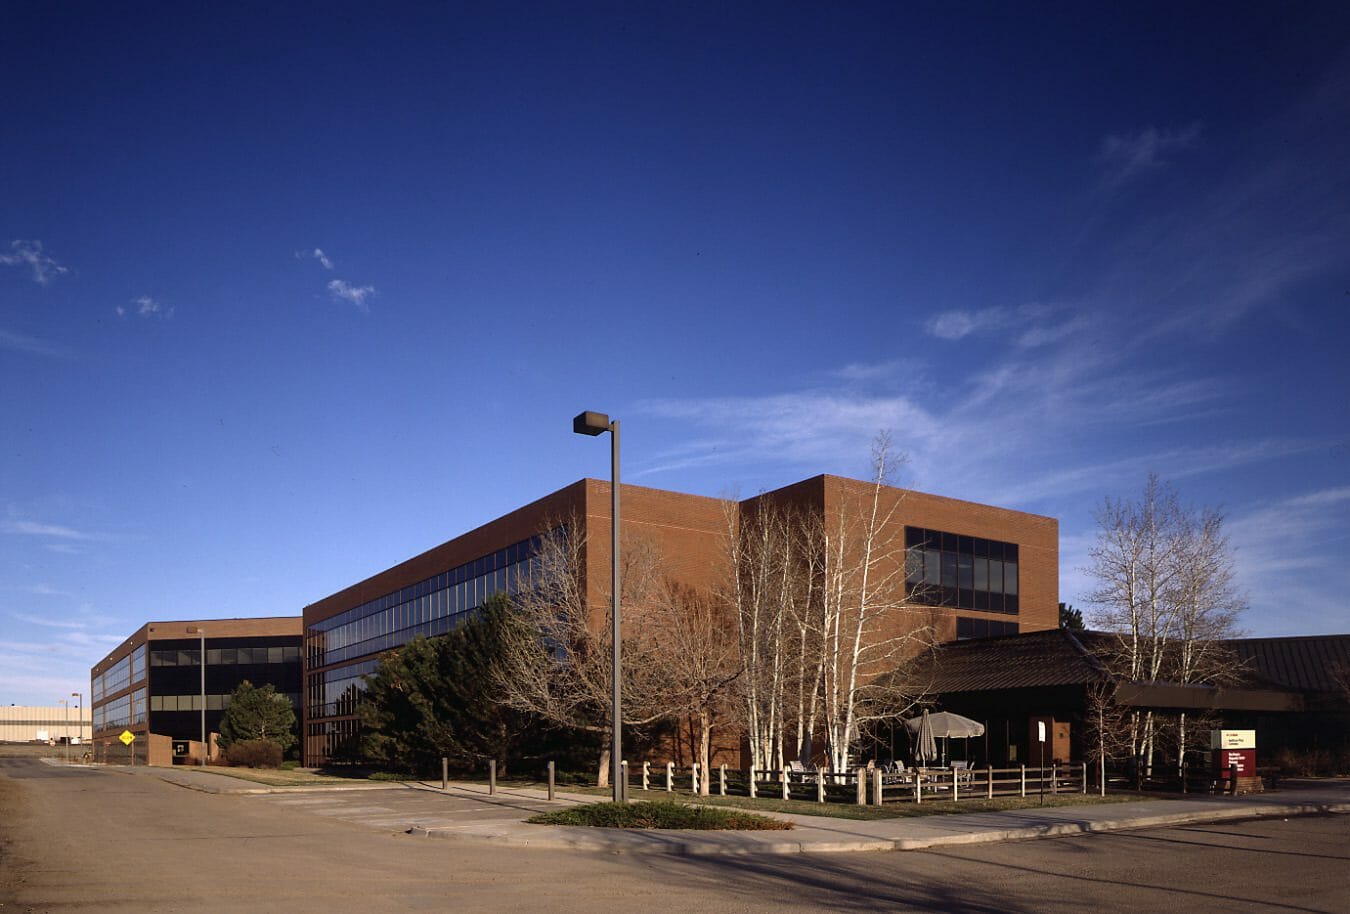 Centennial Medical Plaza and Medical Office Building, exterior street view of building